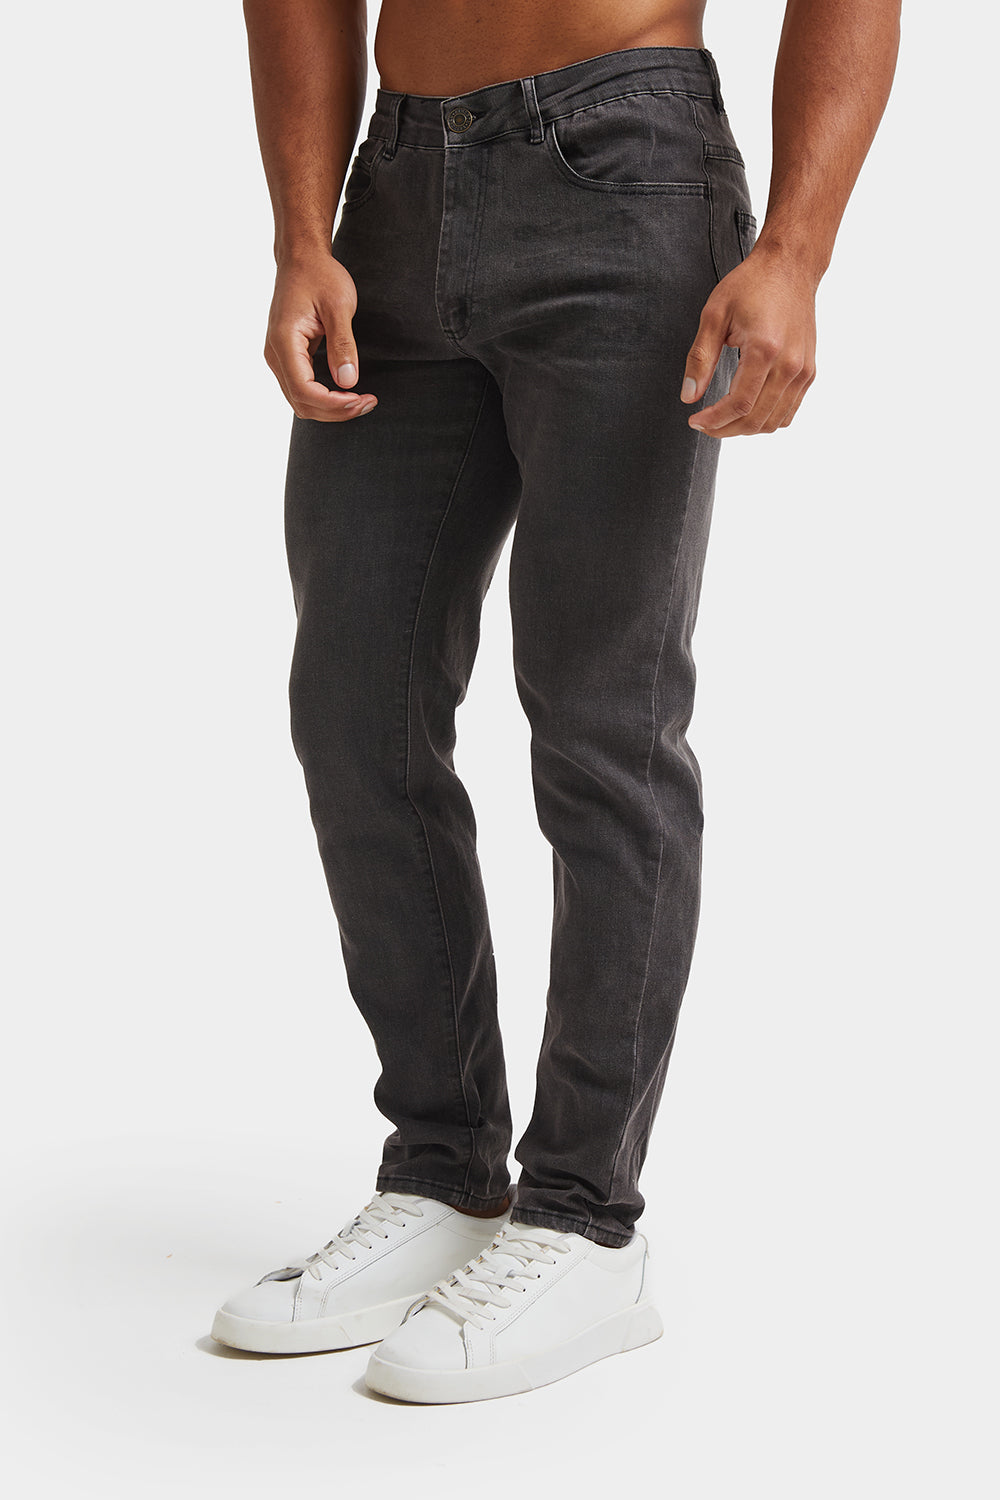 Athletic Fit Jeans USA TAILORED in Dark - ATHLETE - Grey